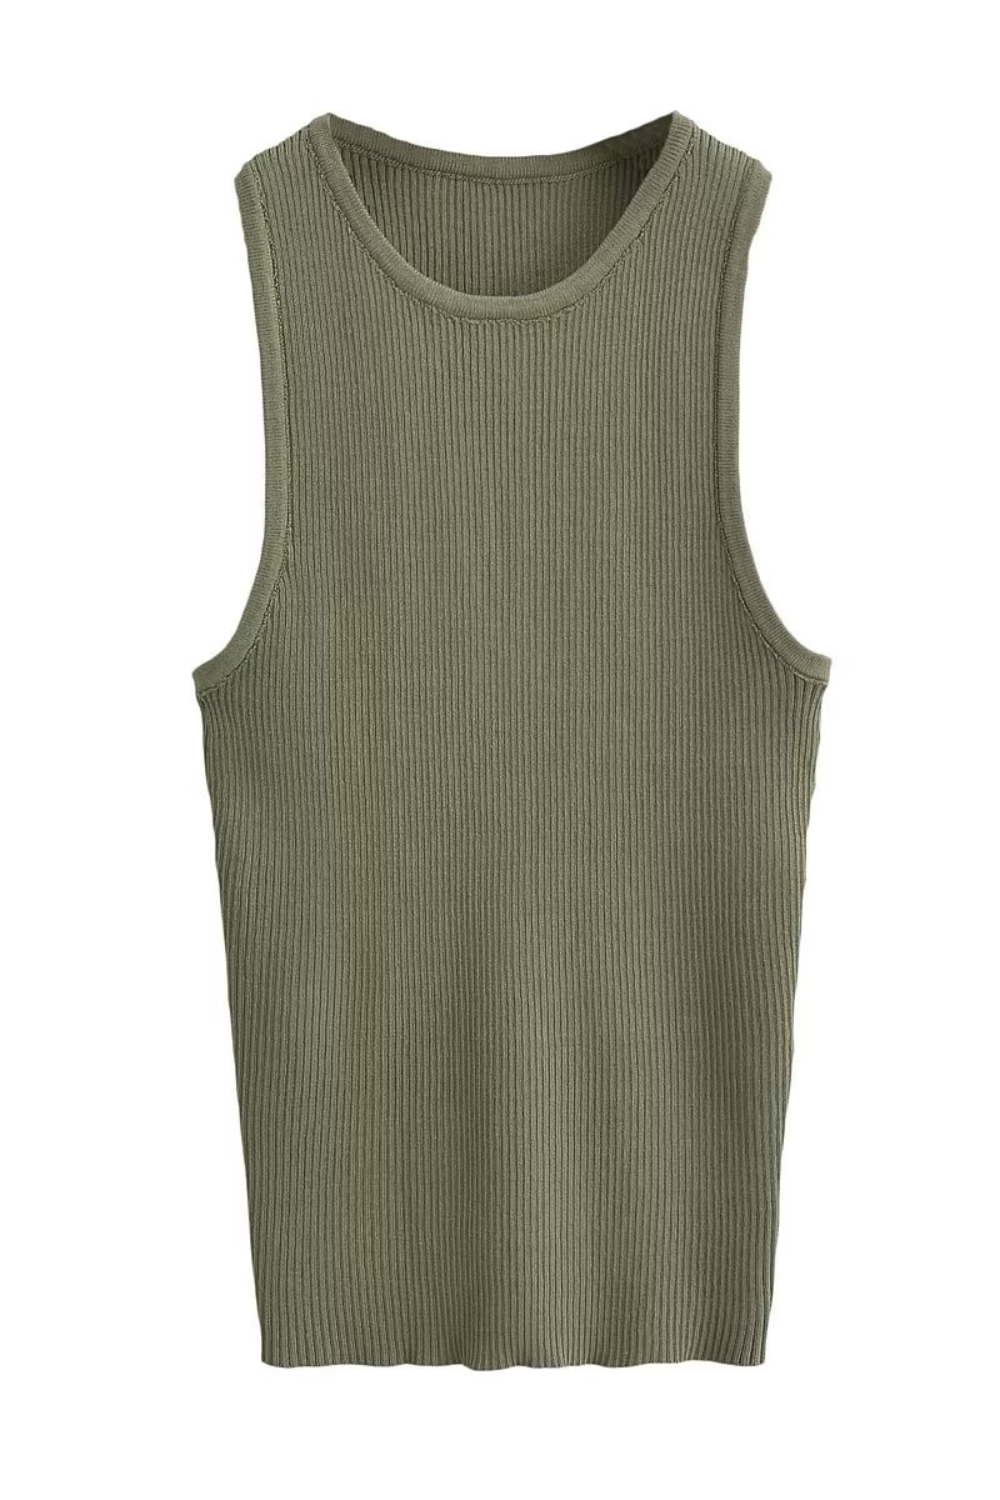 Noelle' Sleeveless Knitted Ribbed Tank Top (2 Colors) – Goodnight Macaroon